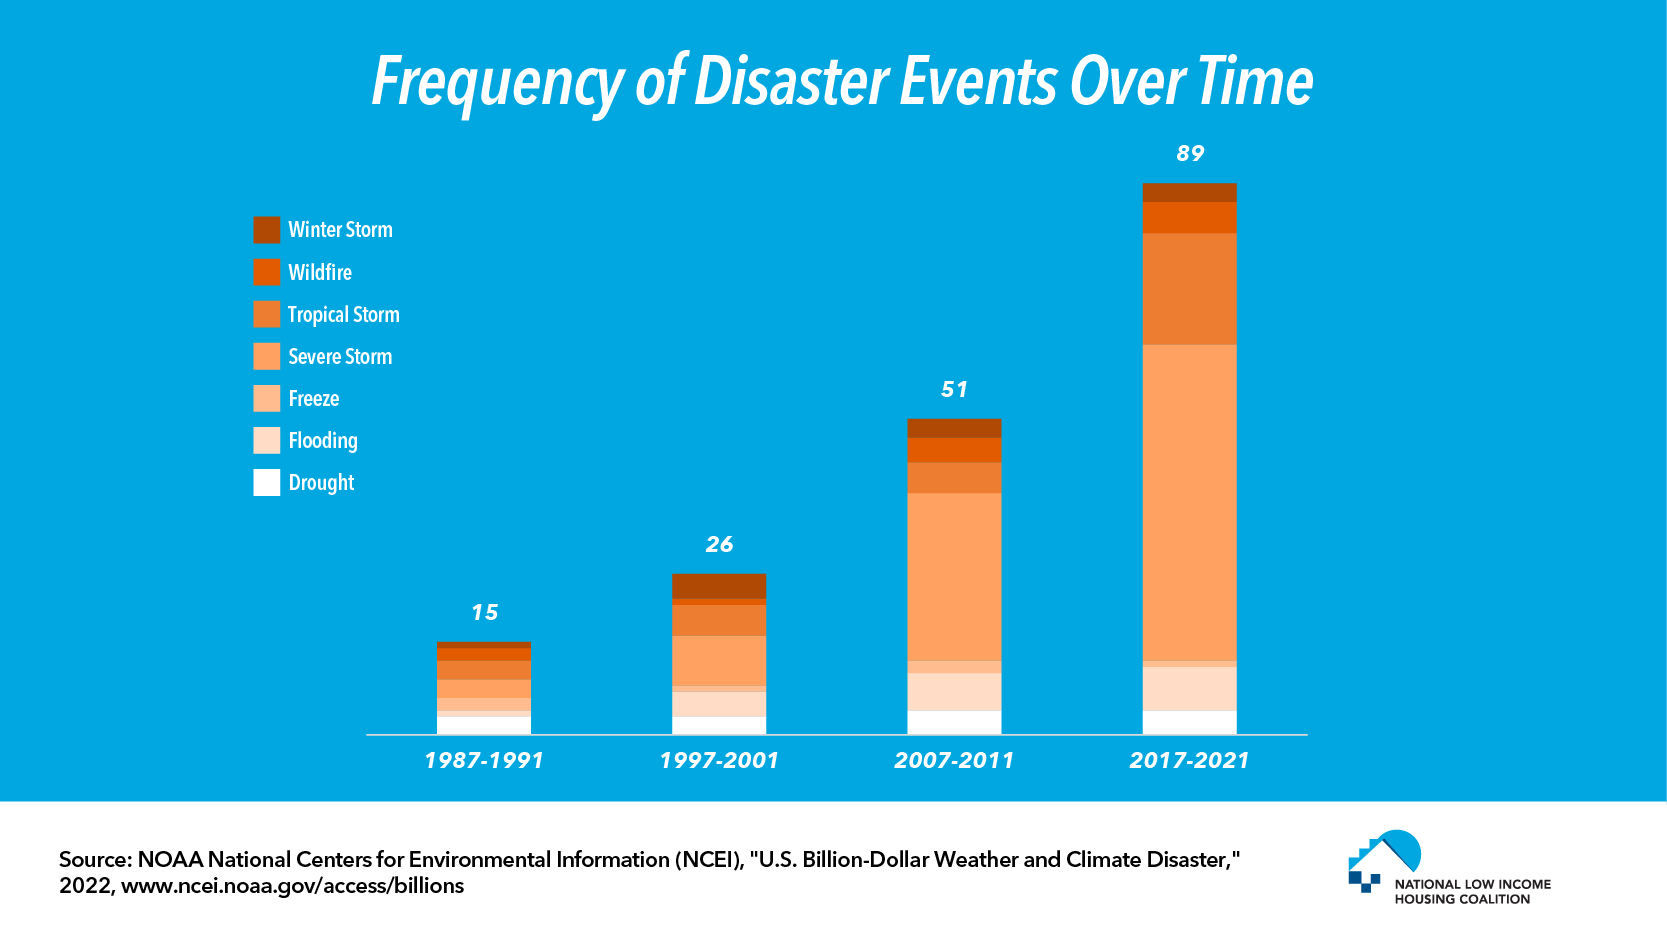 Frequency of Major Weather and Climate Events Has Increased Significantly in Last Four Decades